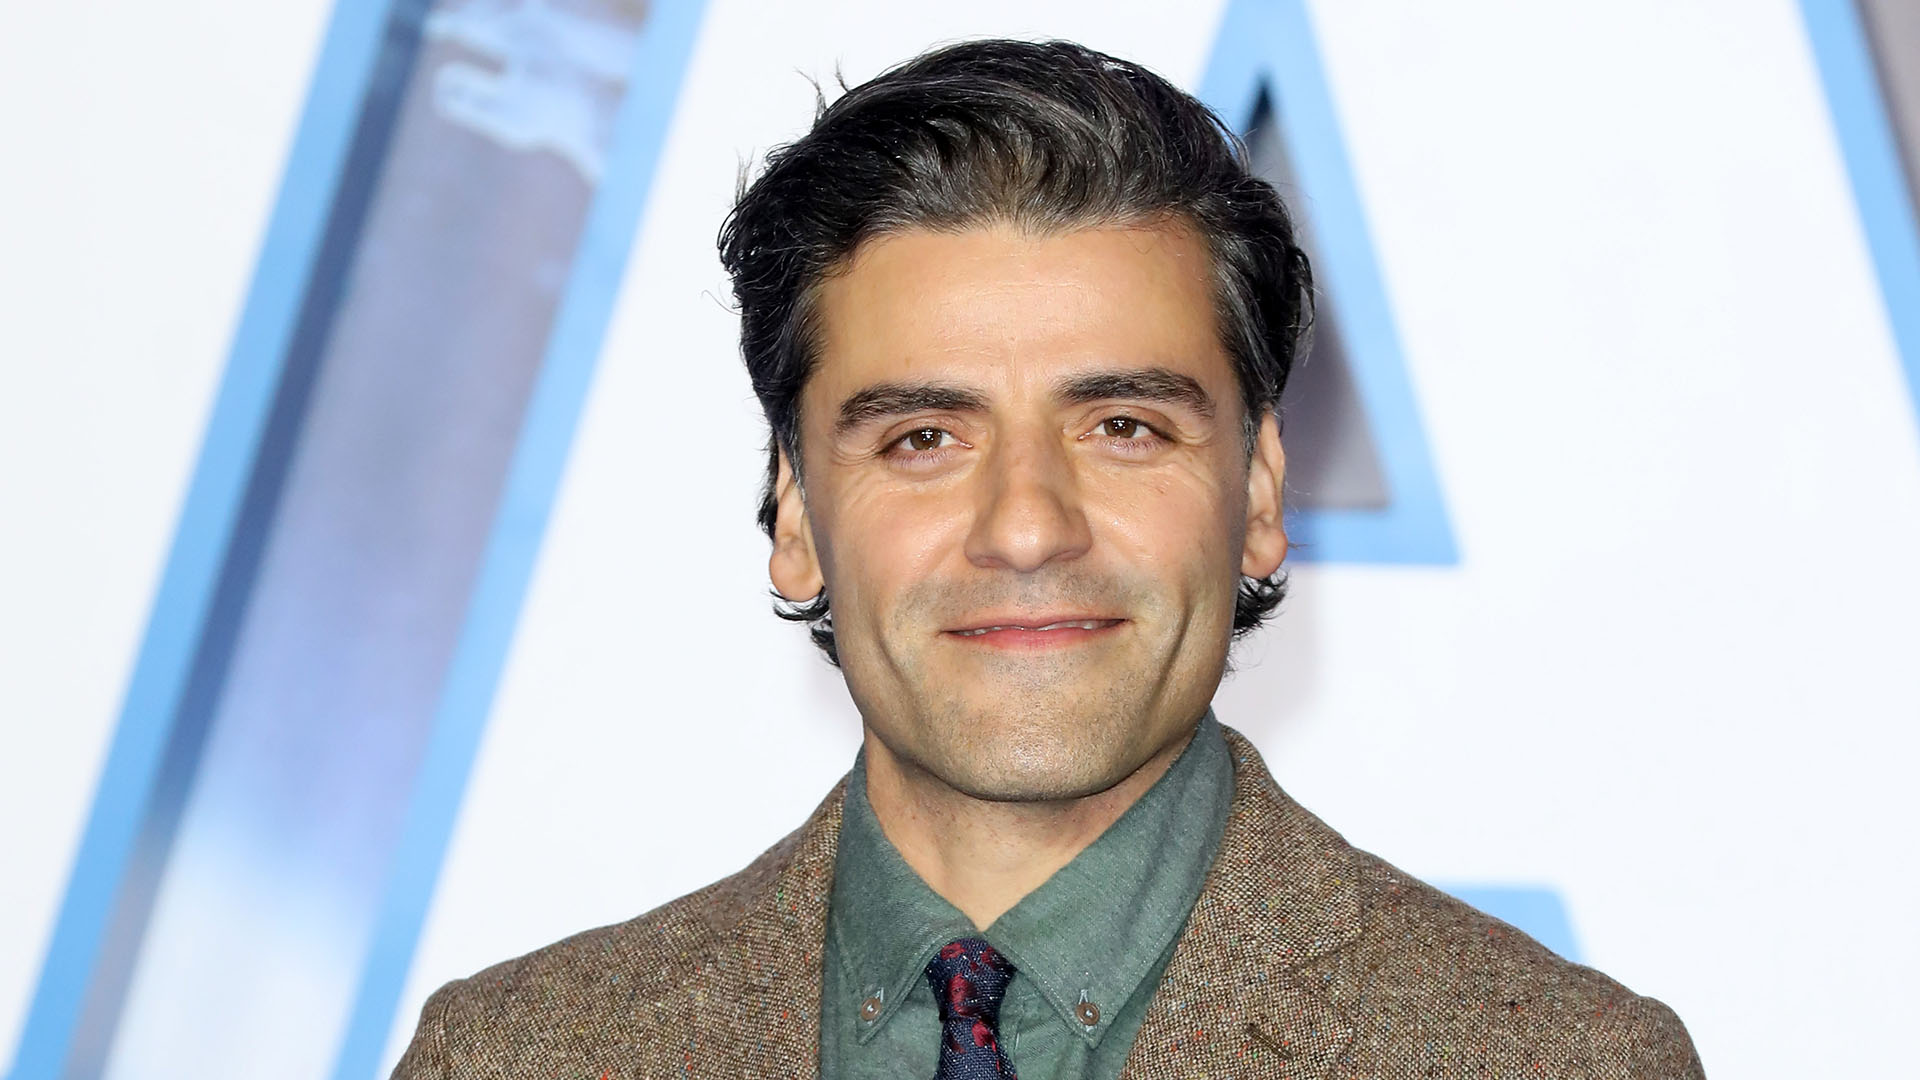 New Trailer: Oscar Isaac Portrays a Troubled Man in 'The Card Counter'